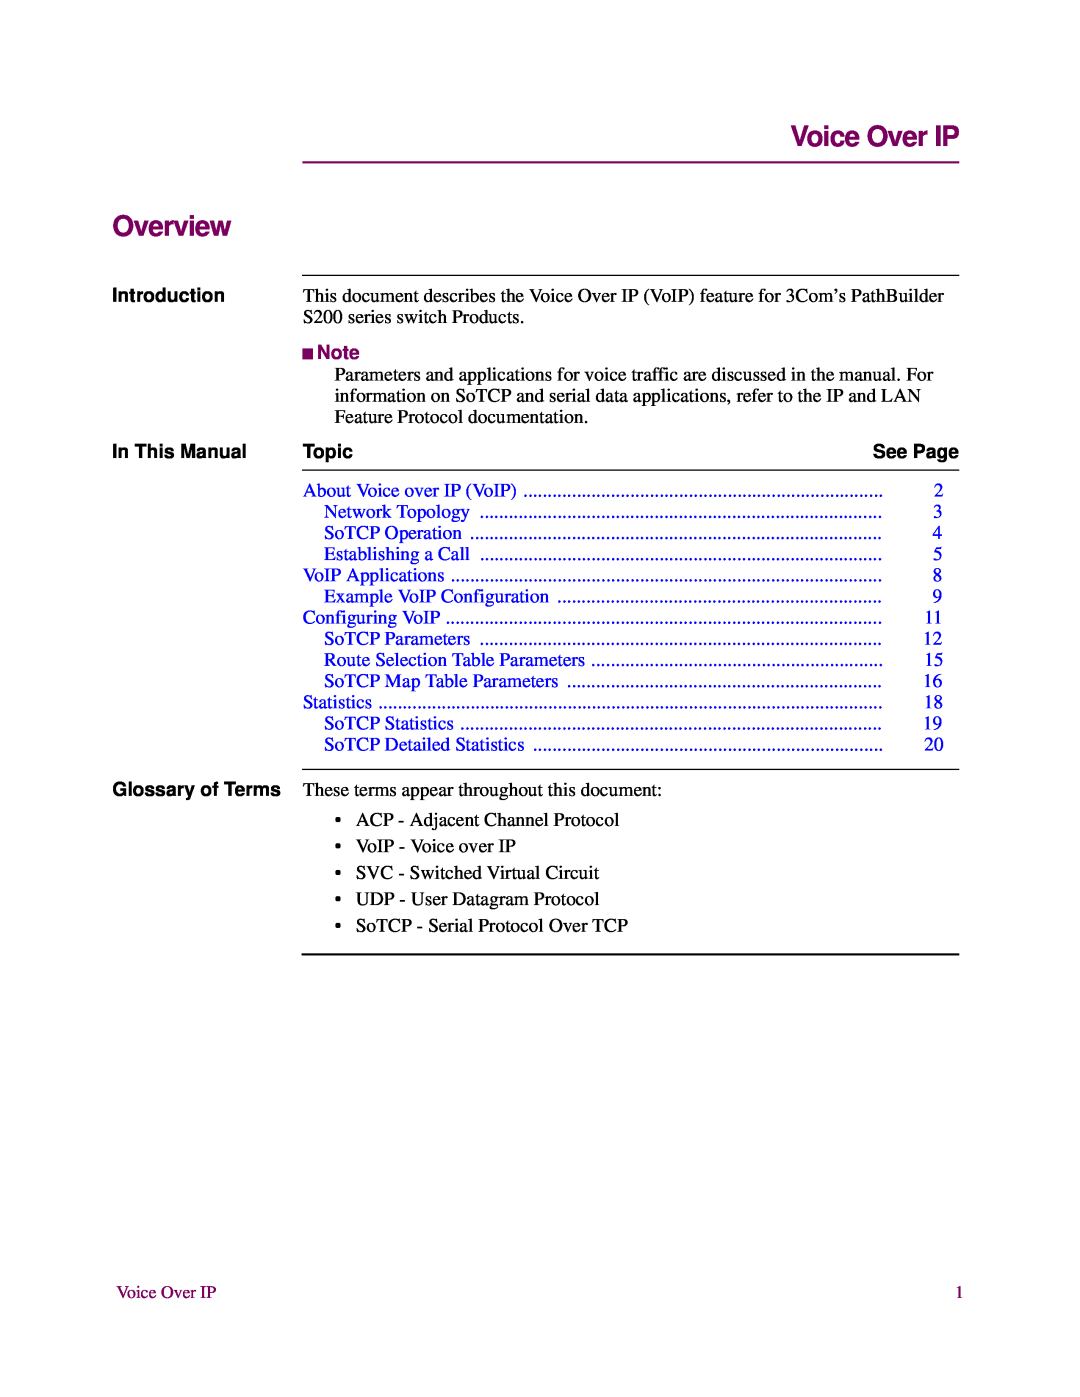 3Com S200 manual Overview, Voice Over IP, Introduction, In This Manual, Topic, See Page 